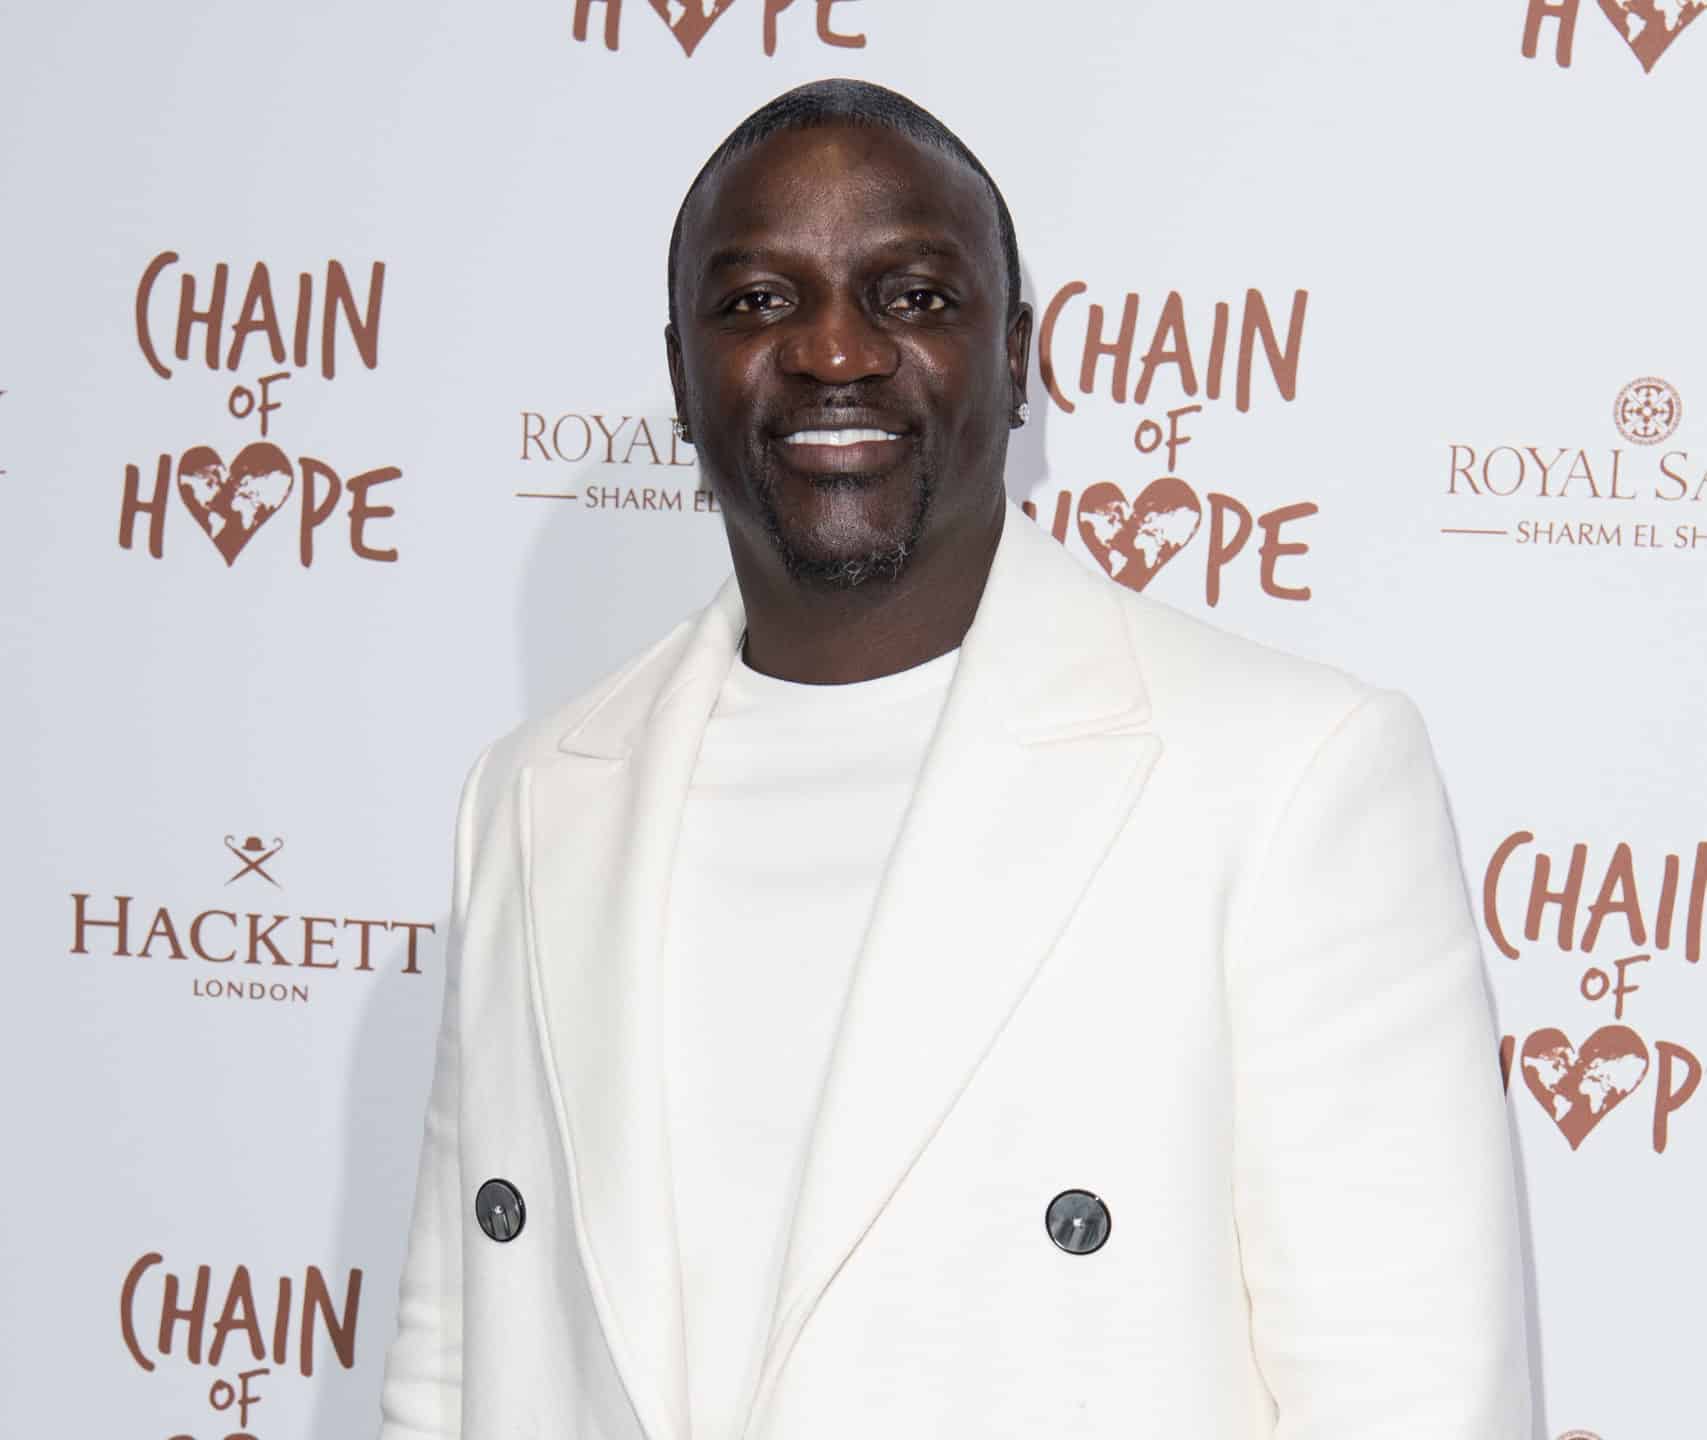 Akon doesn't plan to press charges against the suspect responsible for stealing his Range Rover and hopes they uses the opportunity.